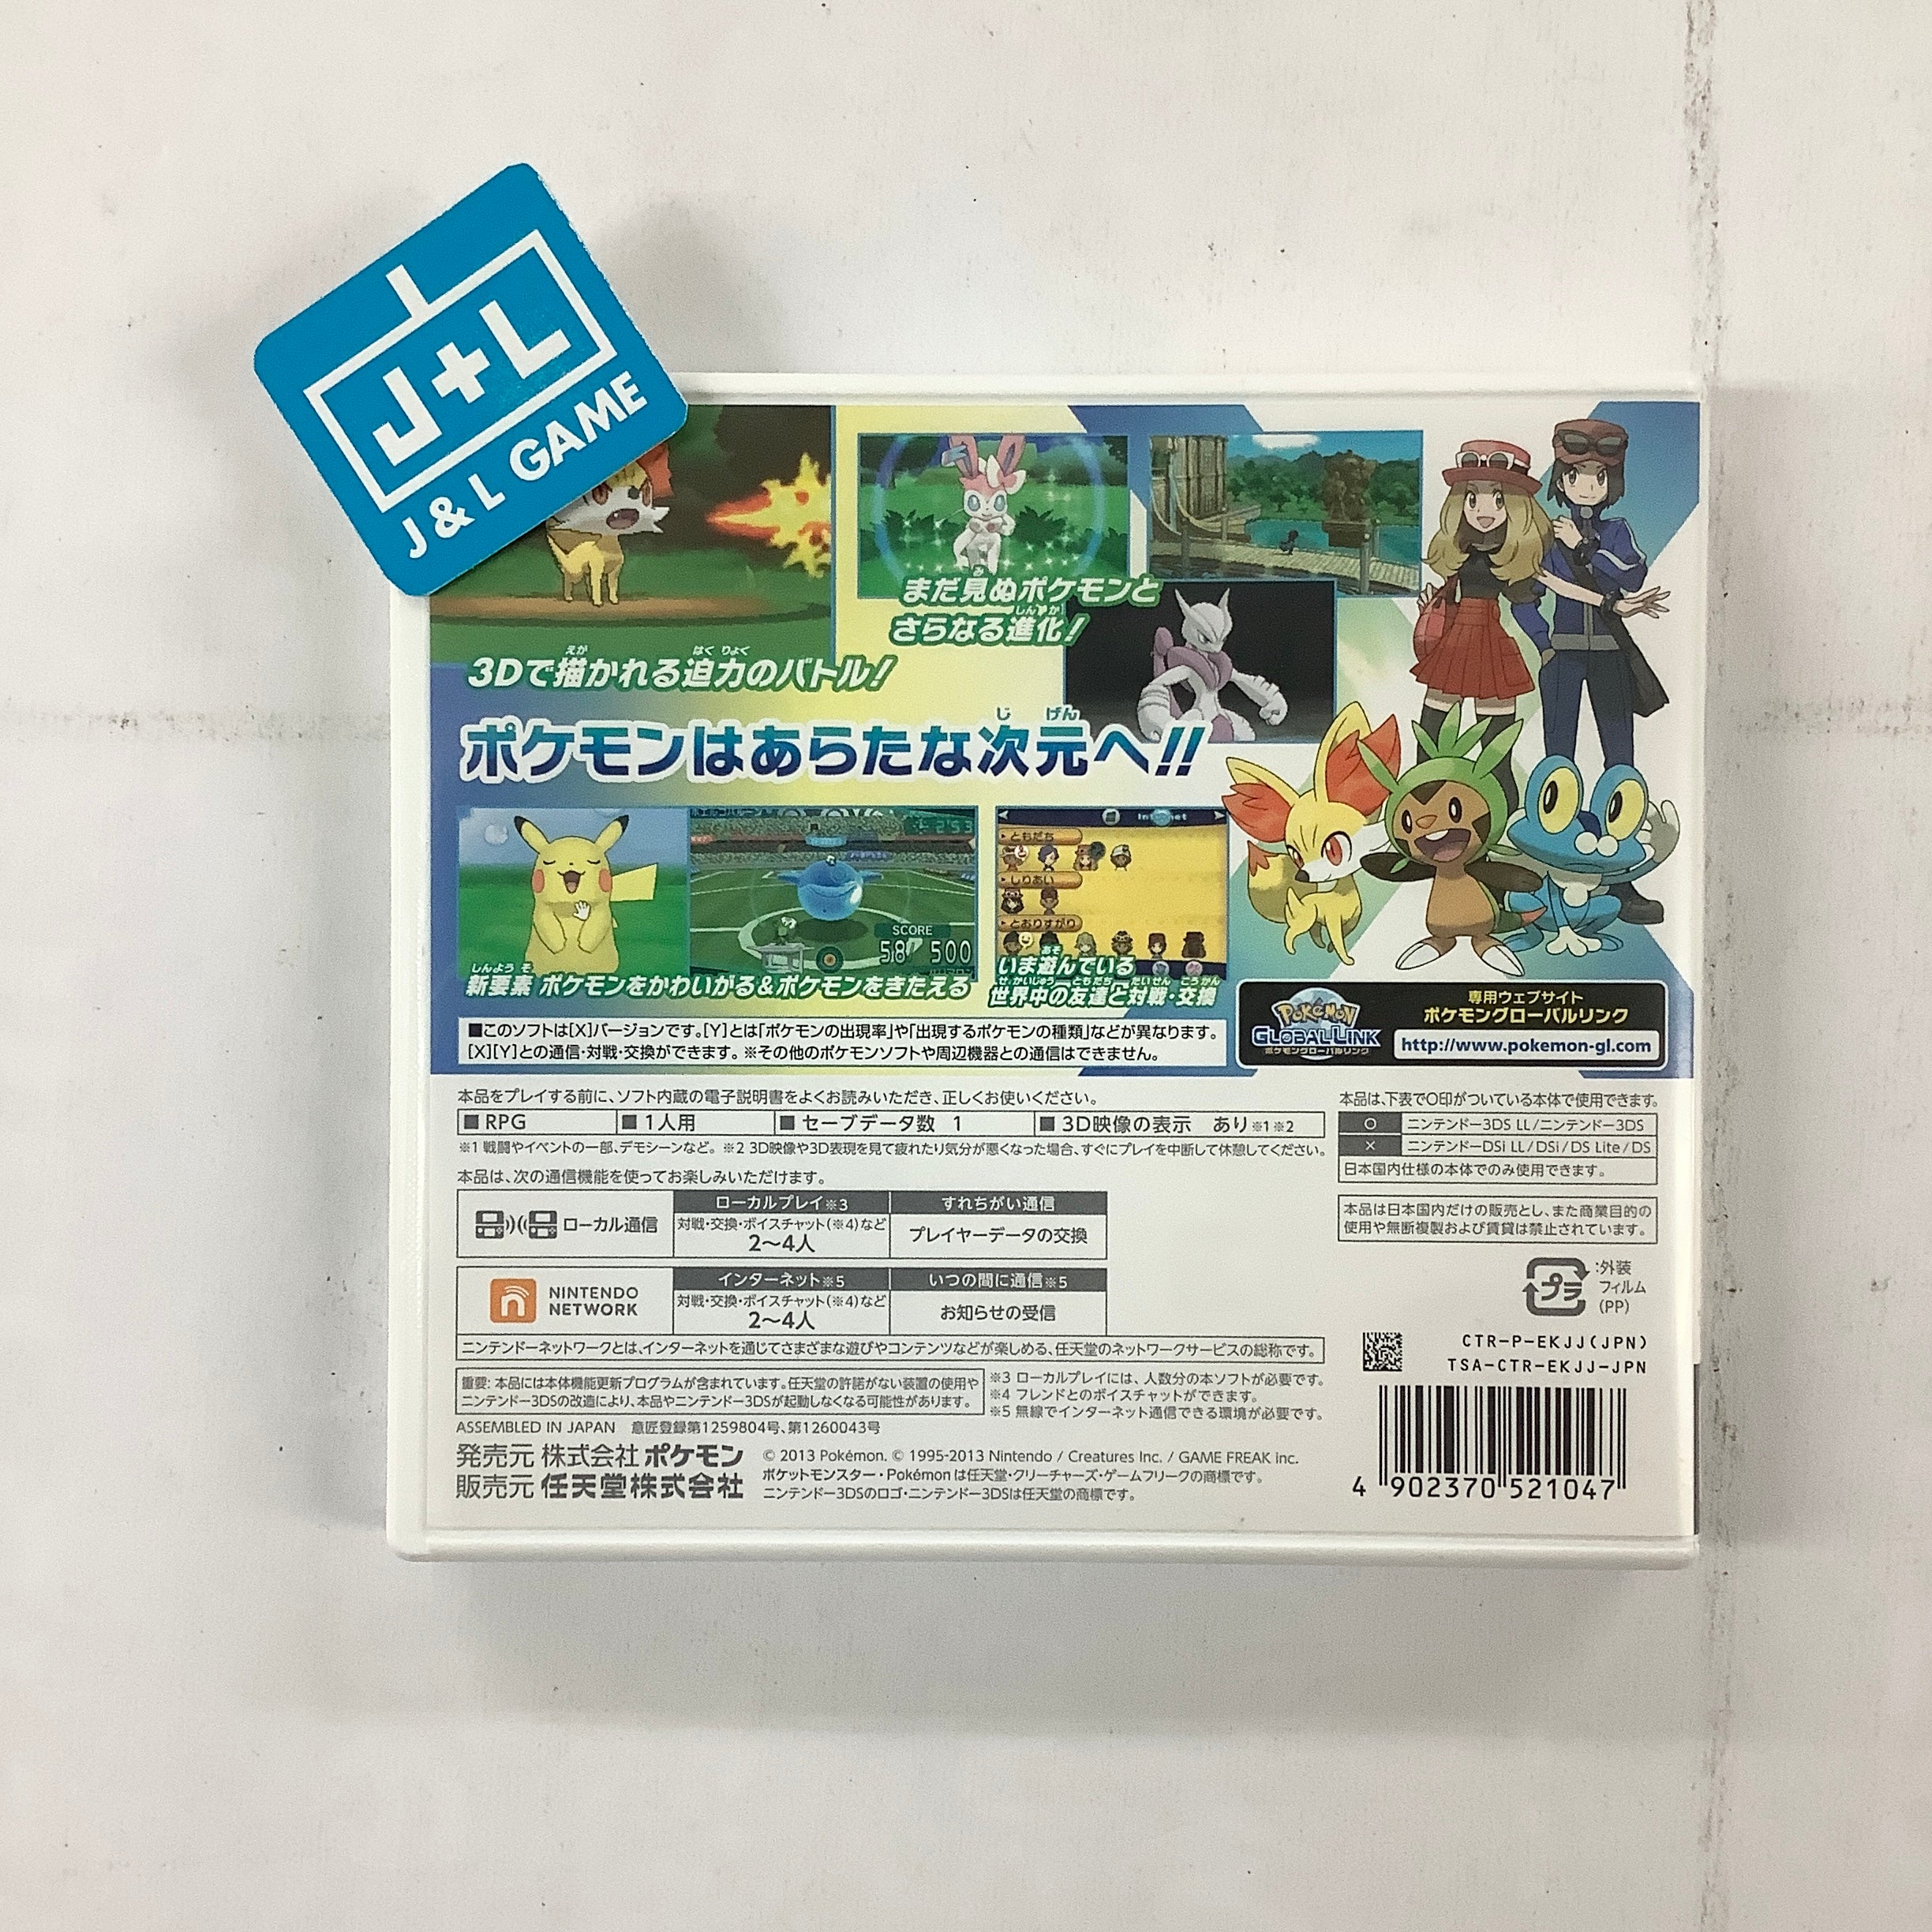 Pocket Monsters X - Nintendo 3DS [Pre-Owned] (Japanese Import) Video Games The Pokemon Company   